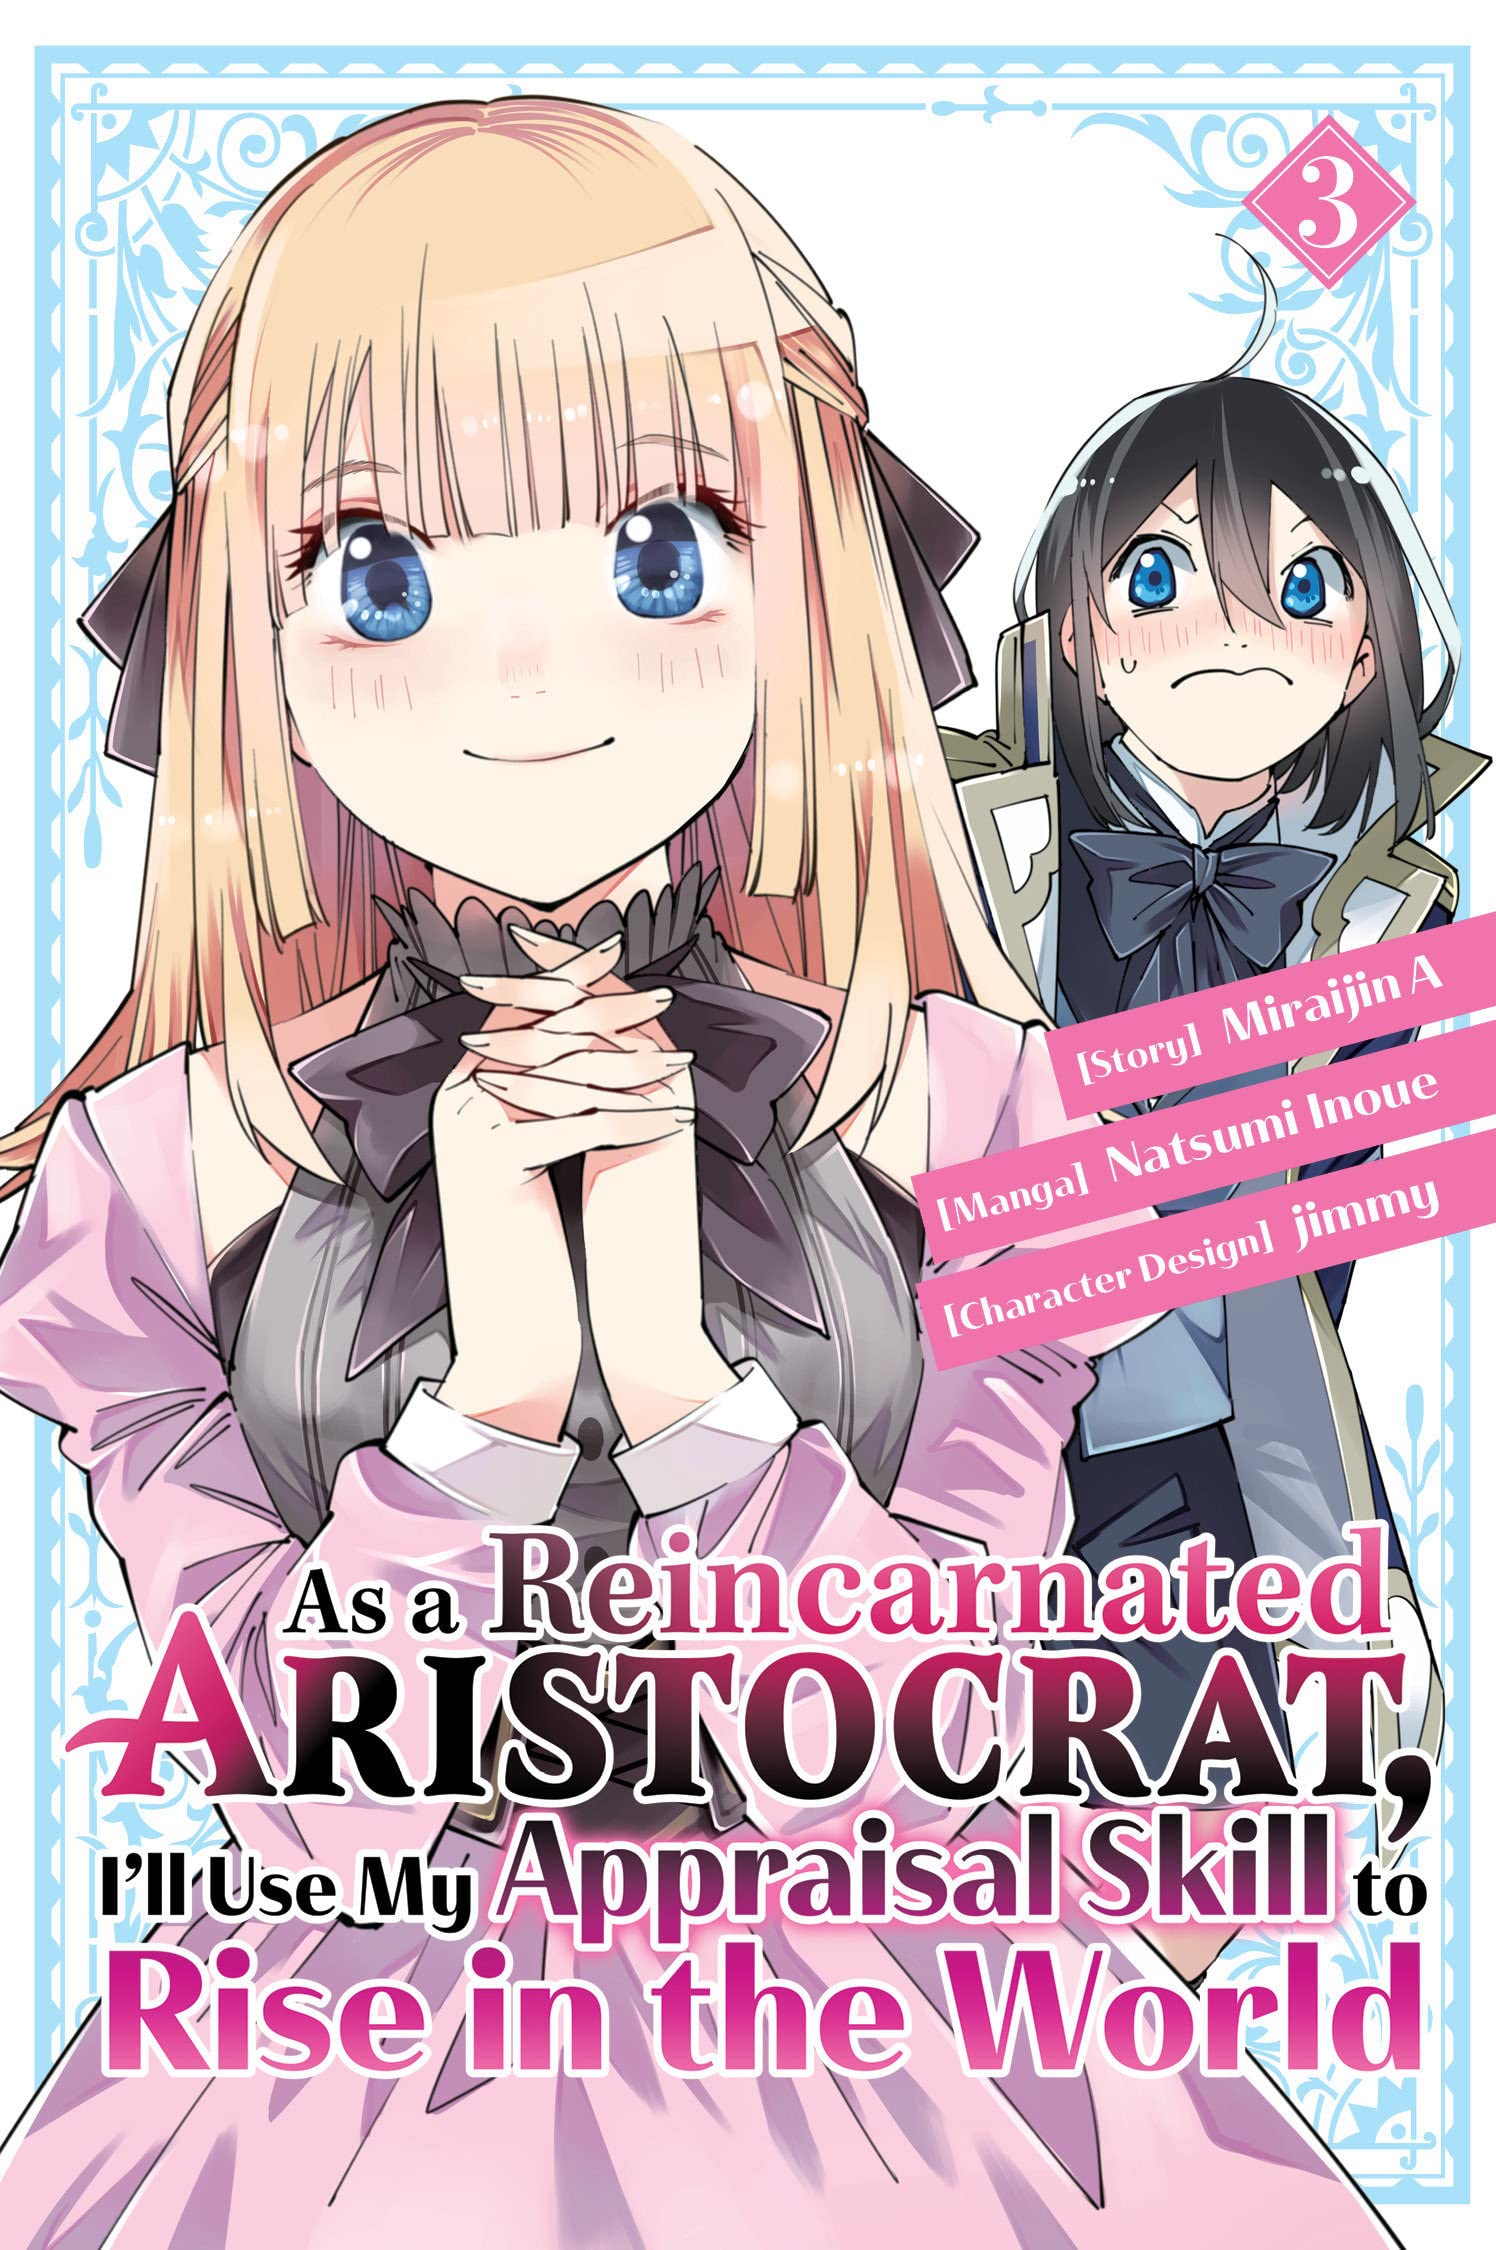 As a Reincarnated Aristocrat, I'll Use My Appraisal Skill to Rise in the World (Manga) Vol. 03